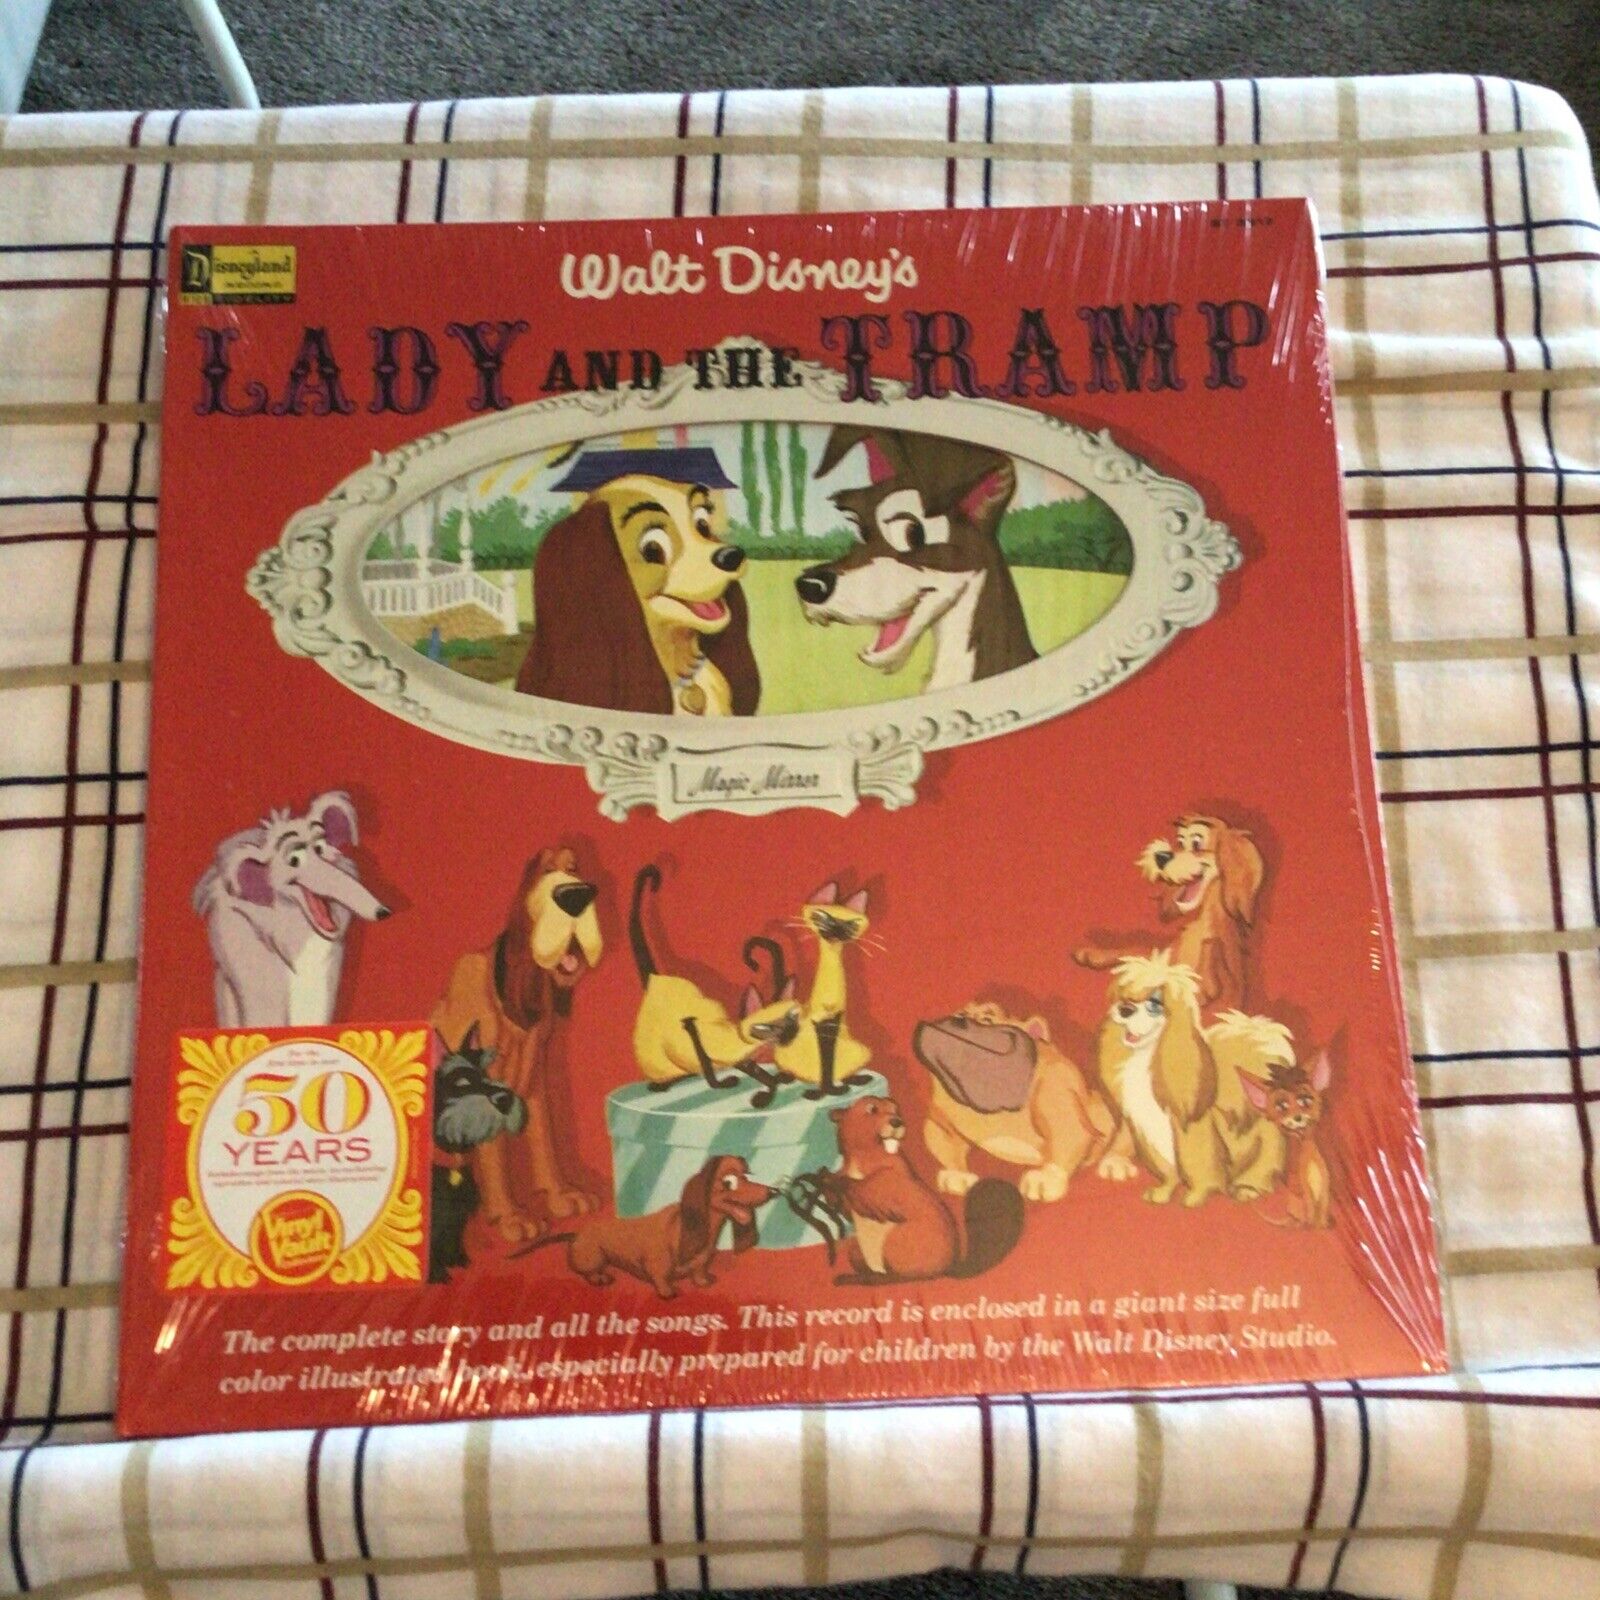 LADY AND THE TRAMP WALT DISNEY STORY BOOK & VINYL RECORD NEW SEALED ST 3917